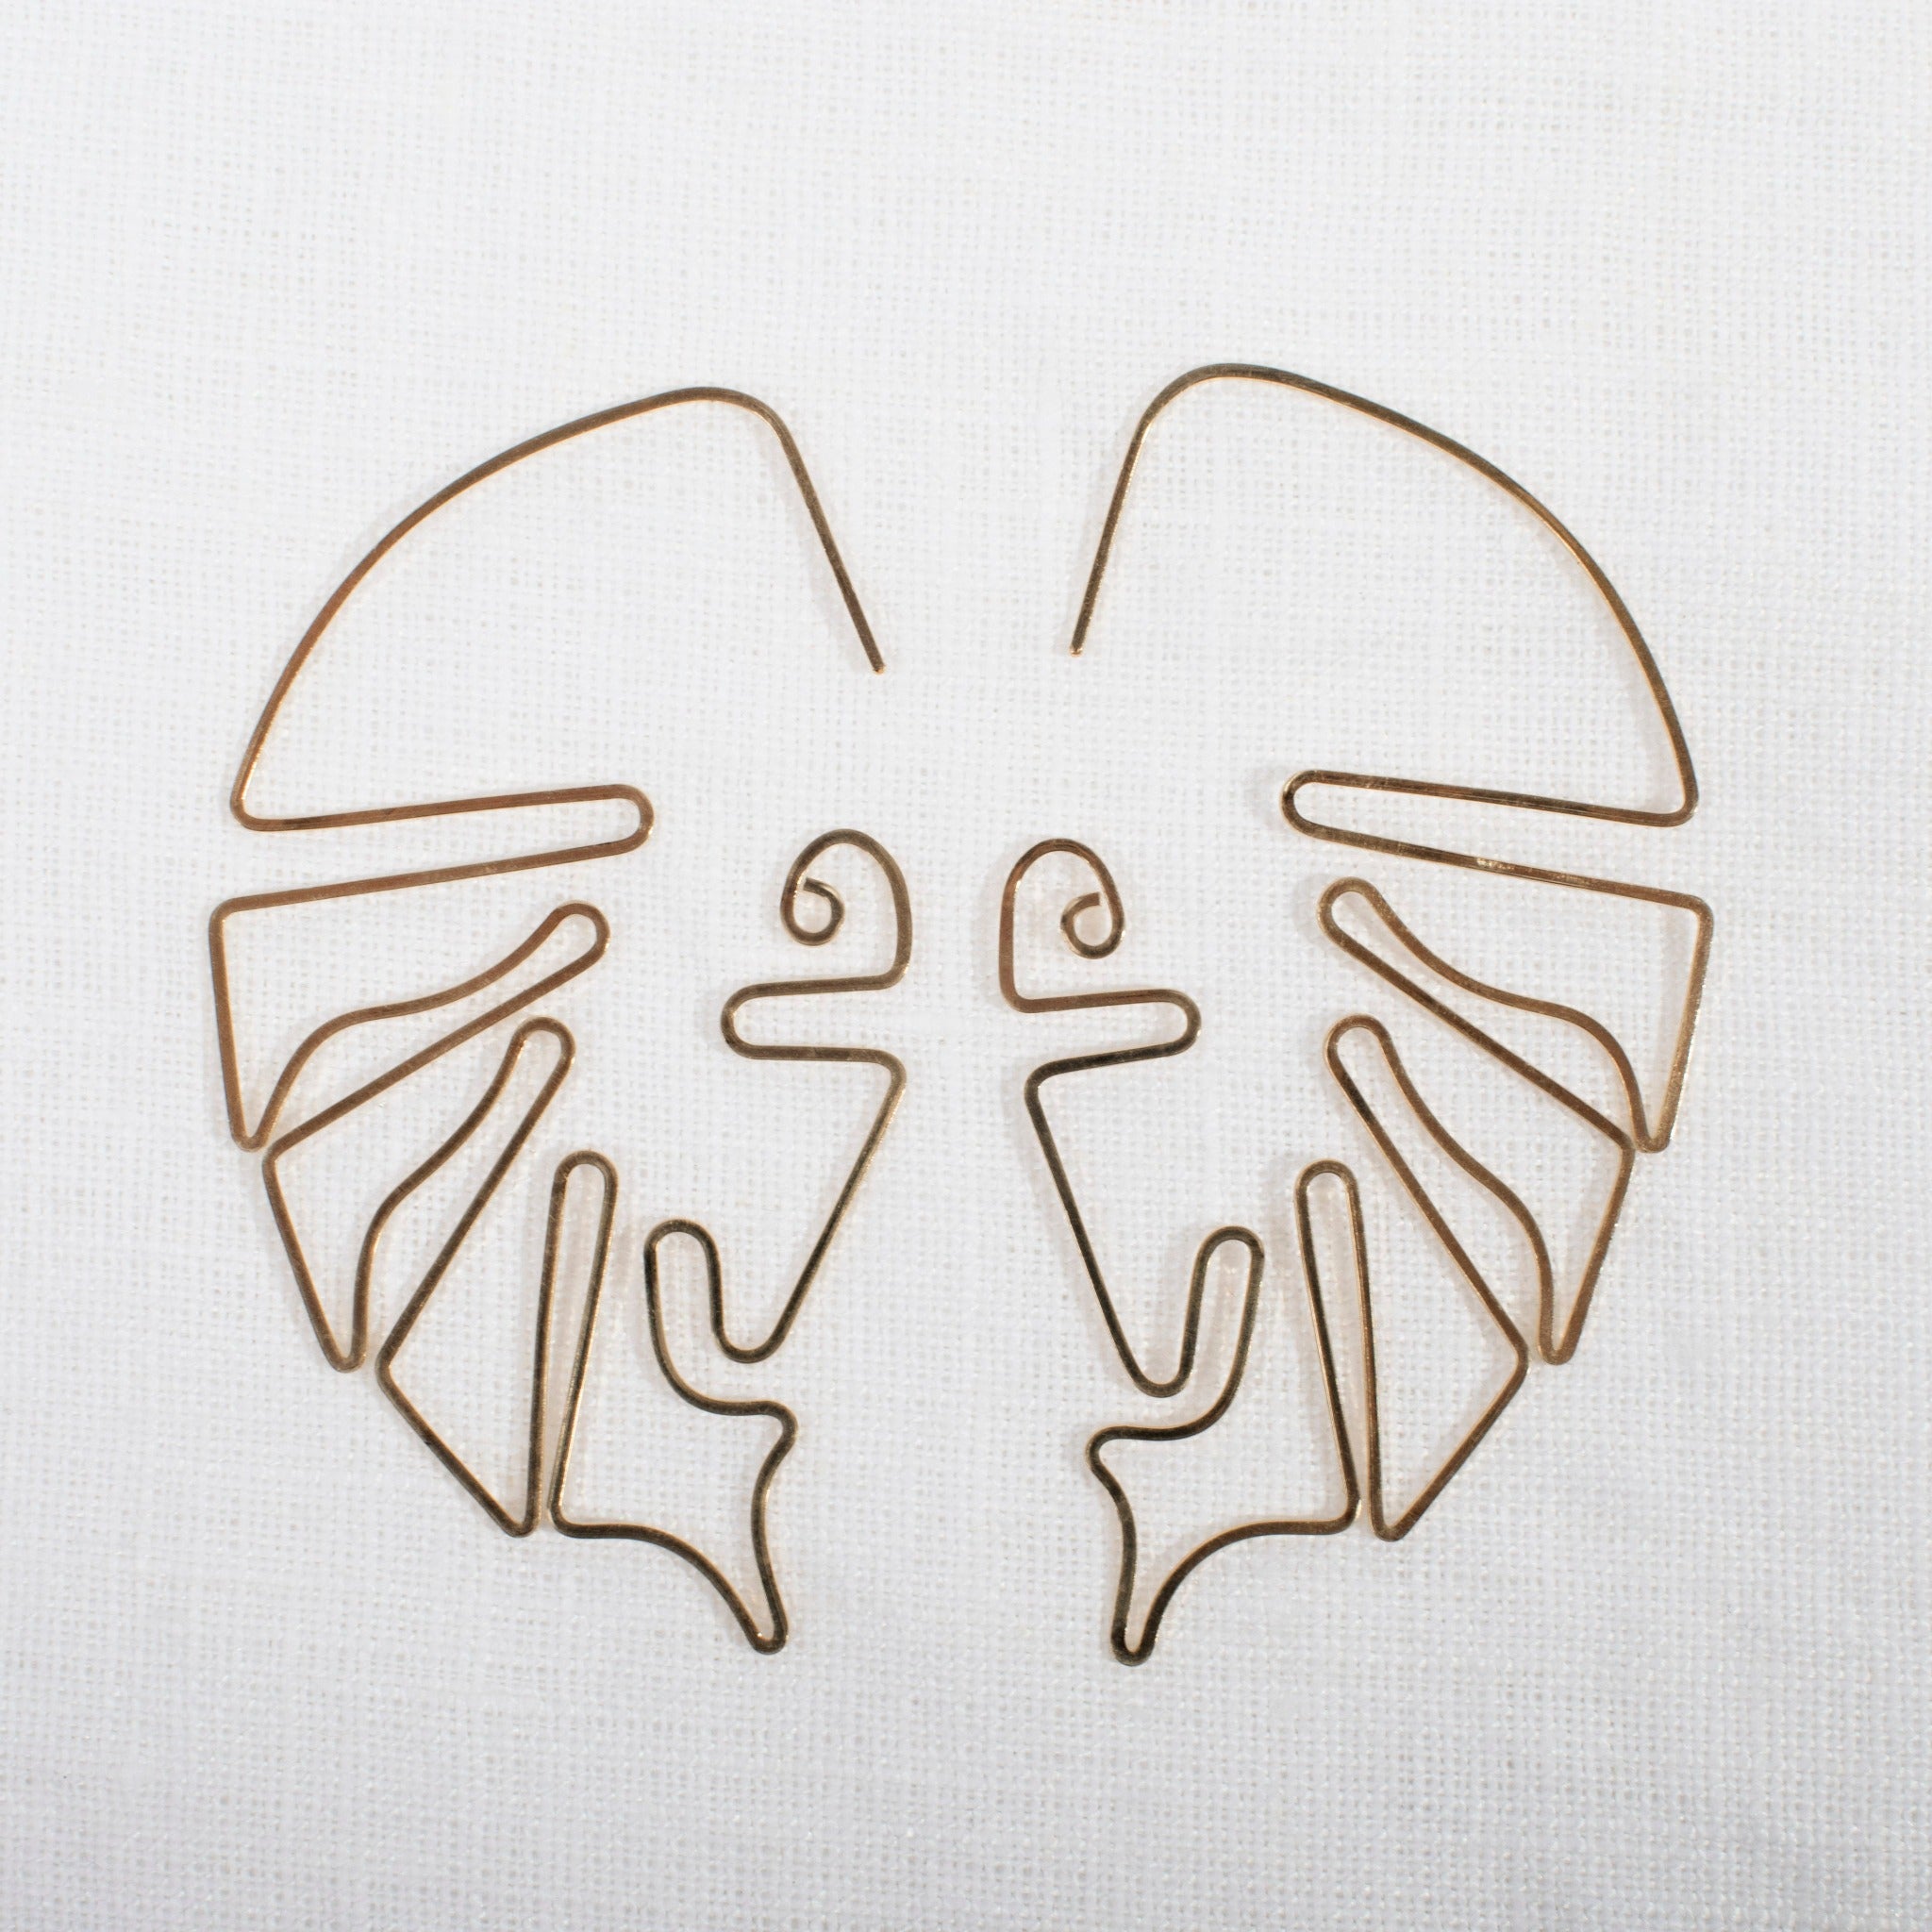 monstera shaped gold earrings on white fabric background